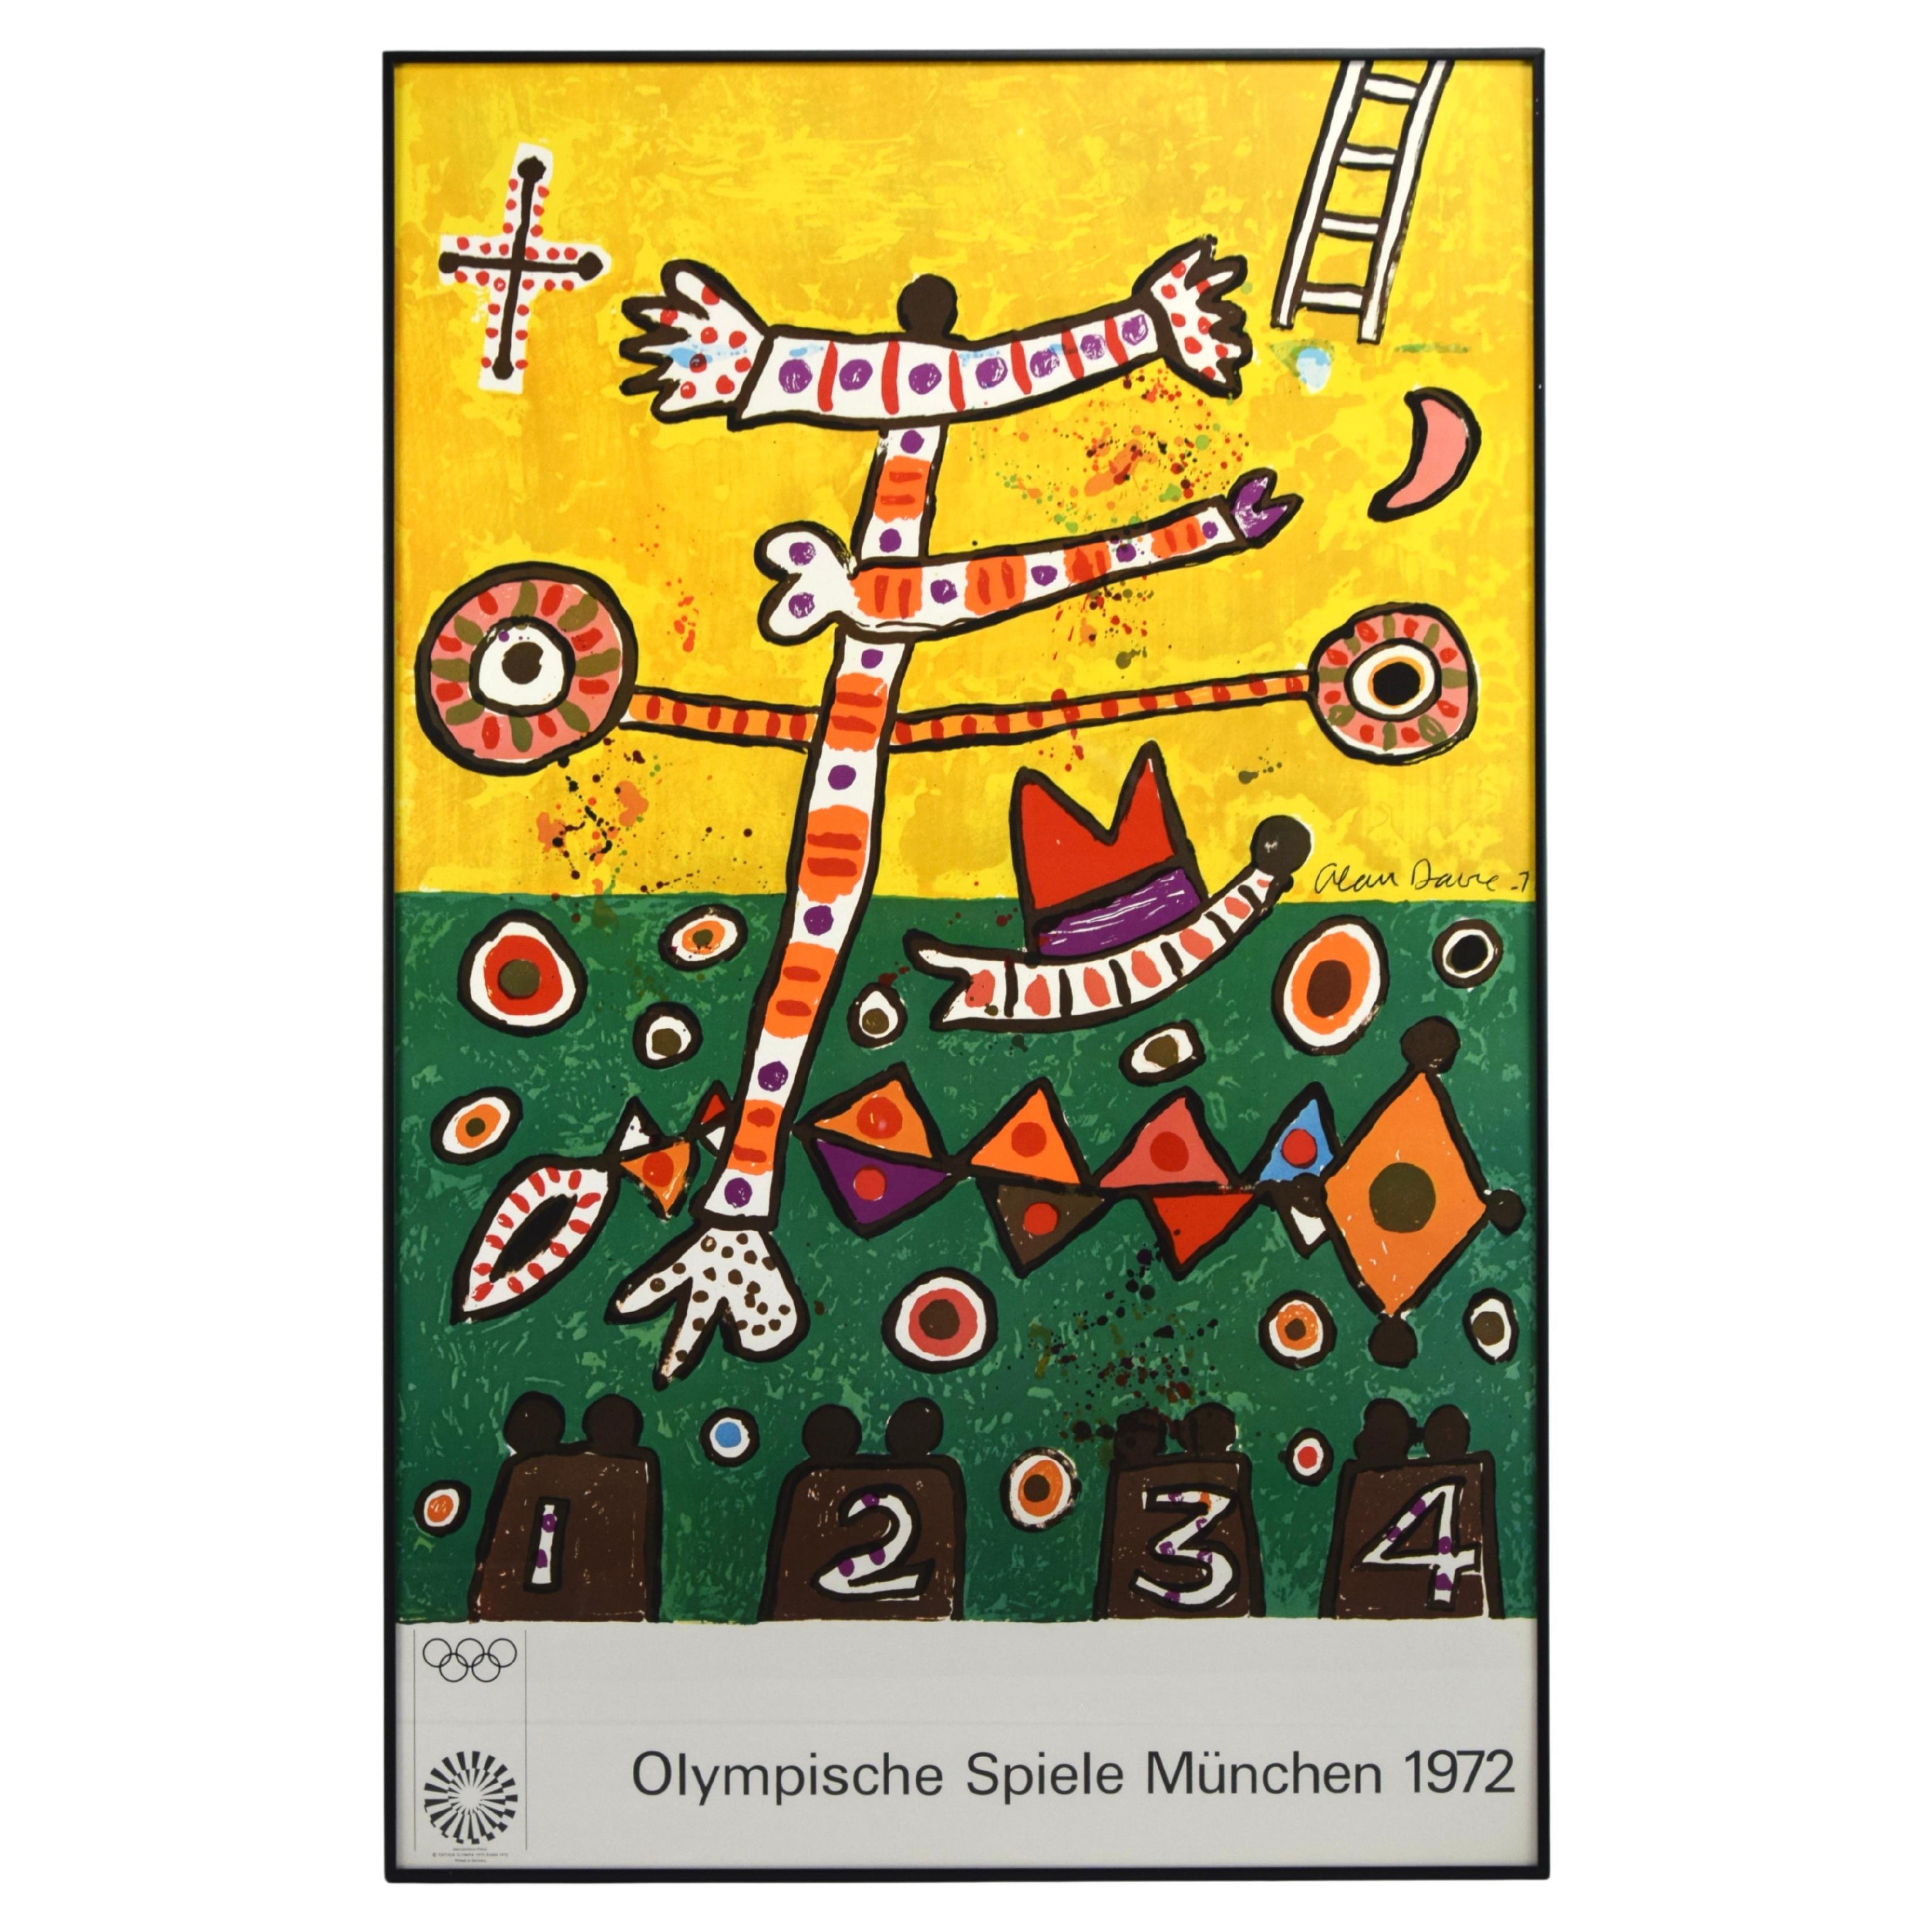 Original 1972 Munich Olympic Poster by Alan Davie For Sale